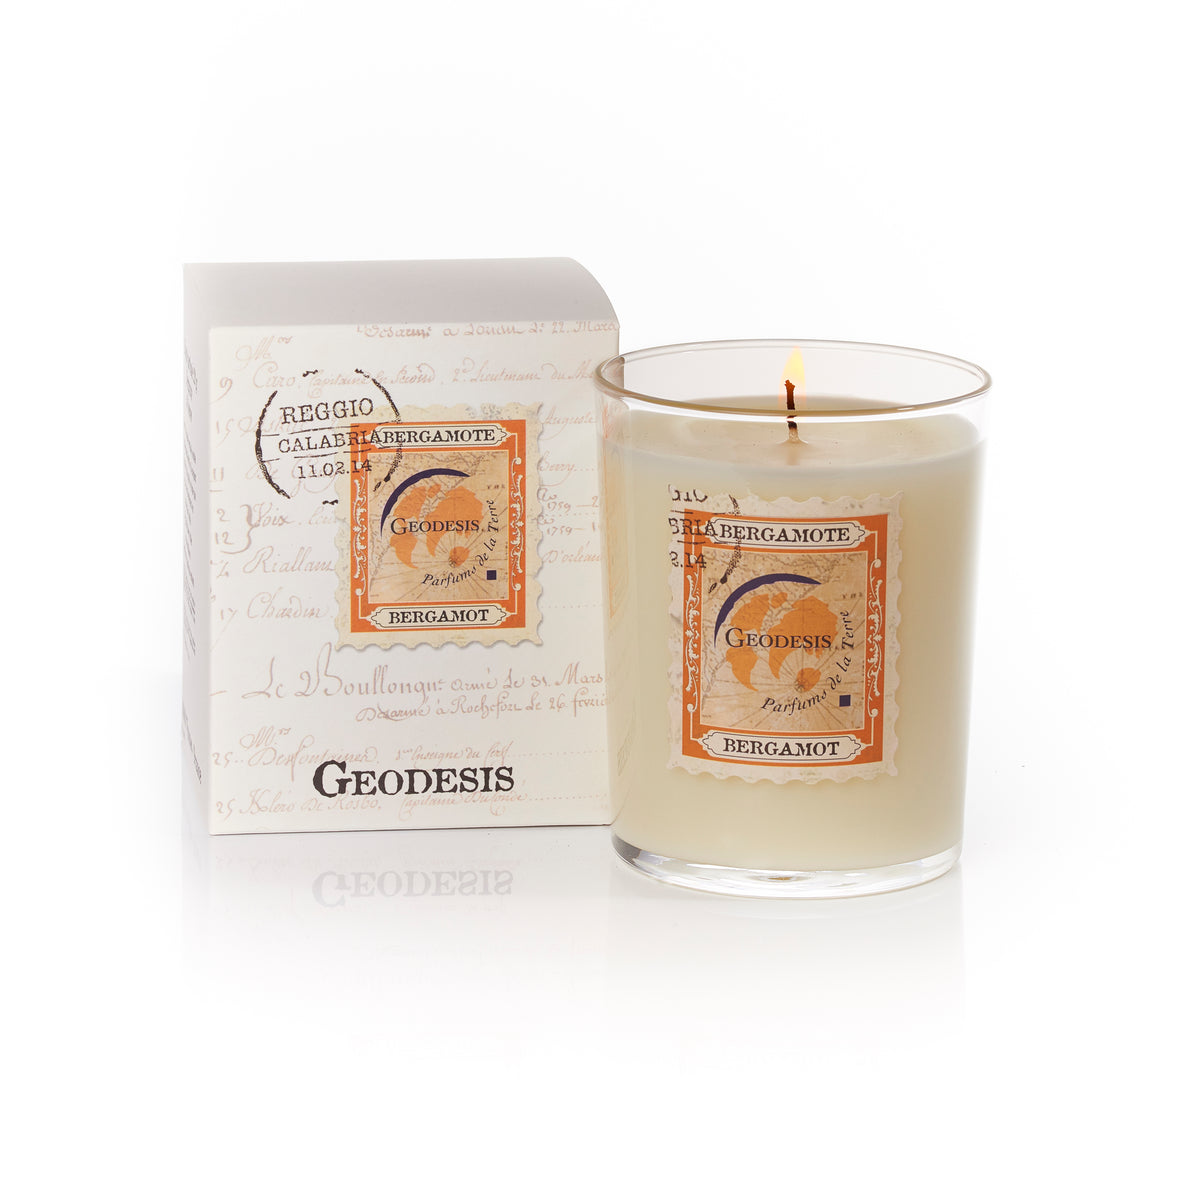 A Geodesis Bergamot 220gm scented candle in a clear glass jar beside its packaging, which features elegant script and vintage-style labels.